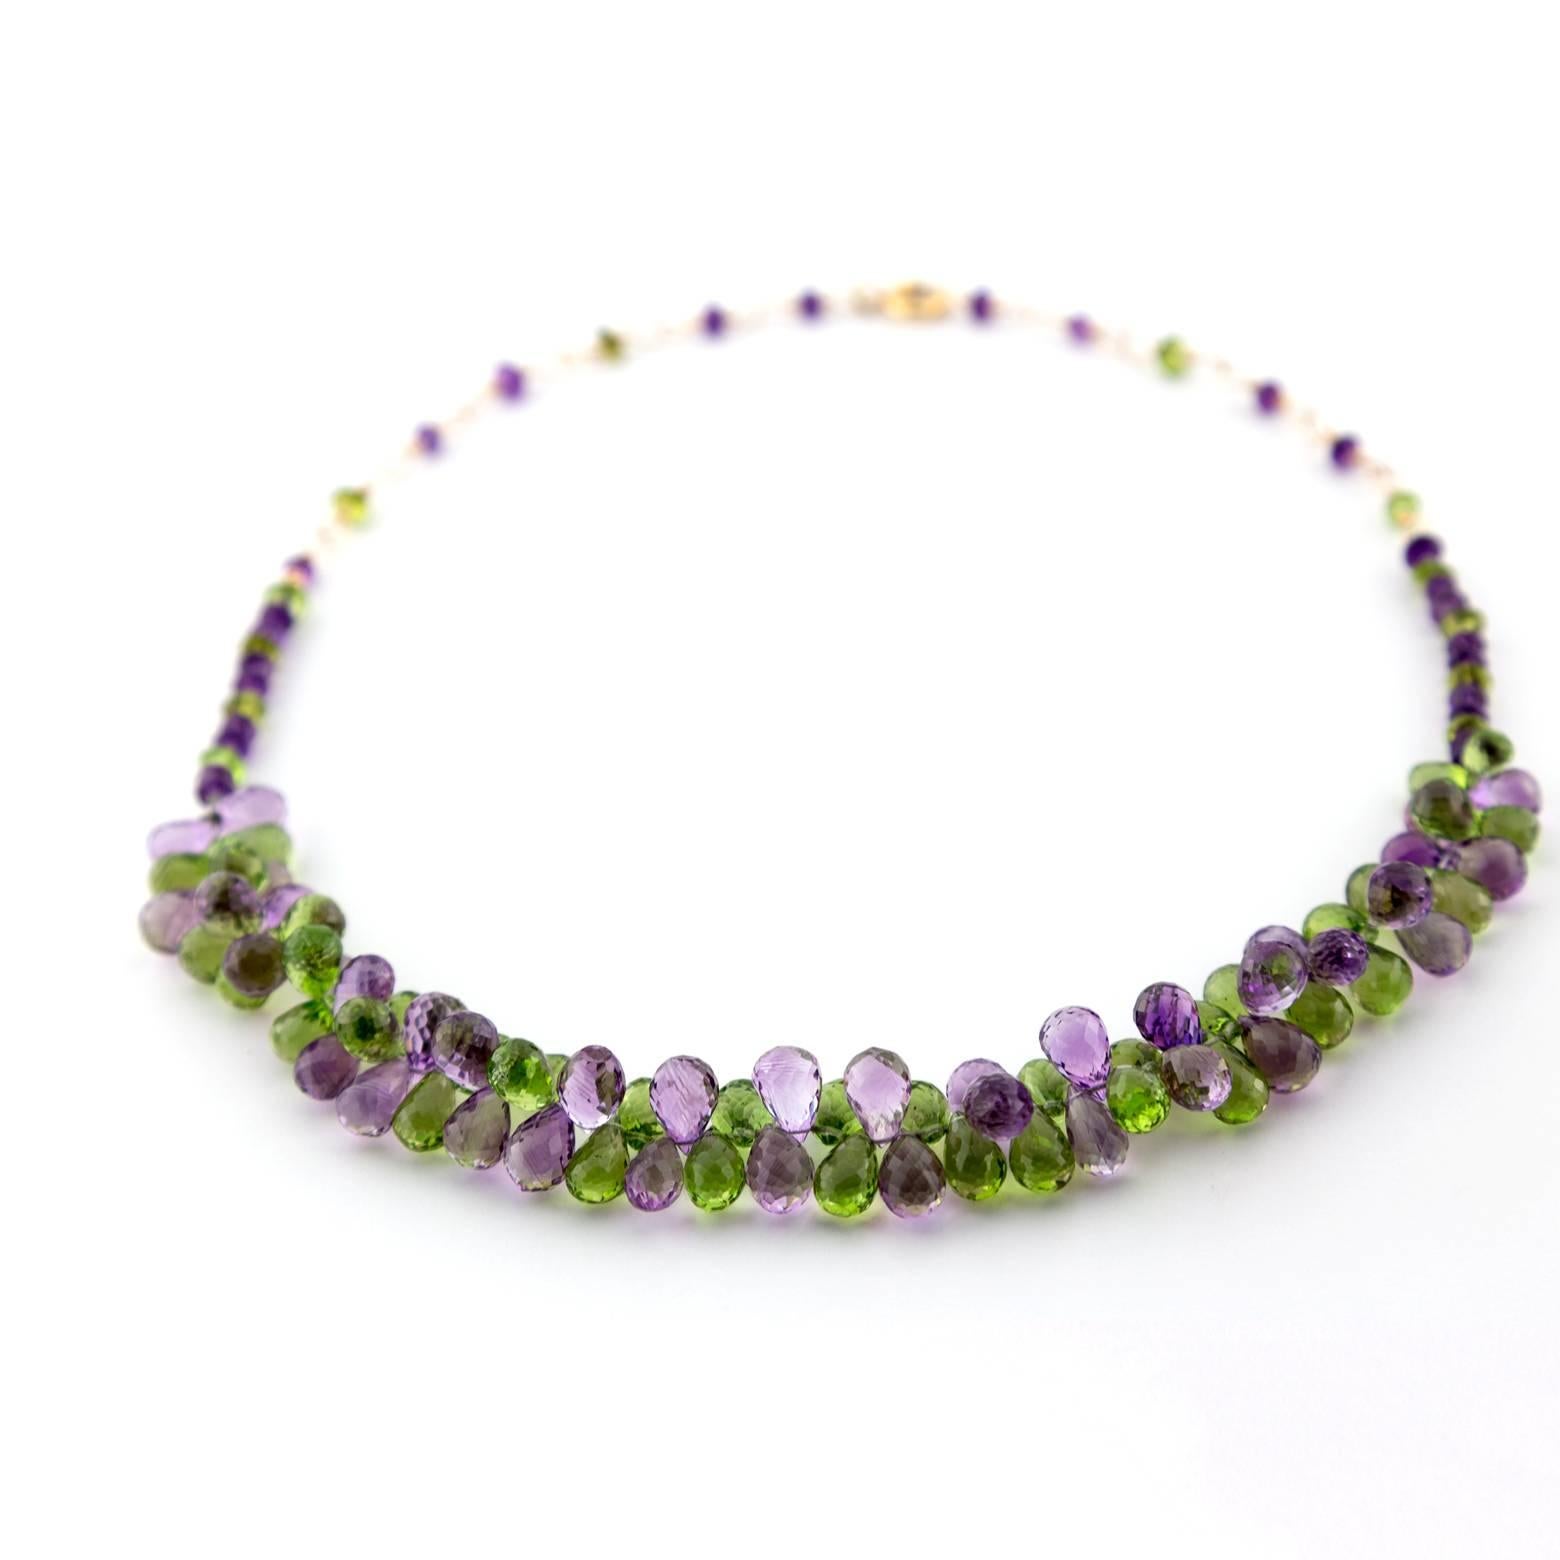 This piece is very dazzling! It's three dimensional movement allows it to sparkle catching all angles of light. It dances around your neck with beautiful shades of purple and green and has a comfortable delicate texture. It's fun, it's playful, it's